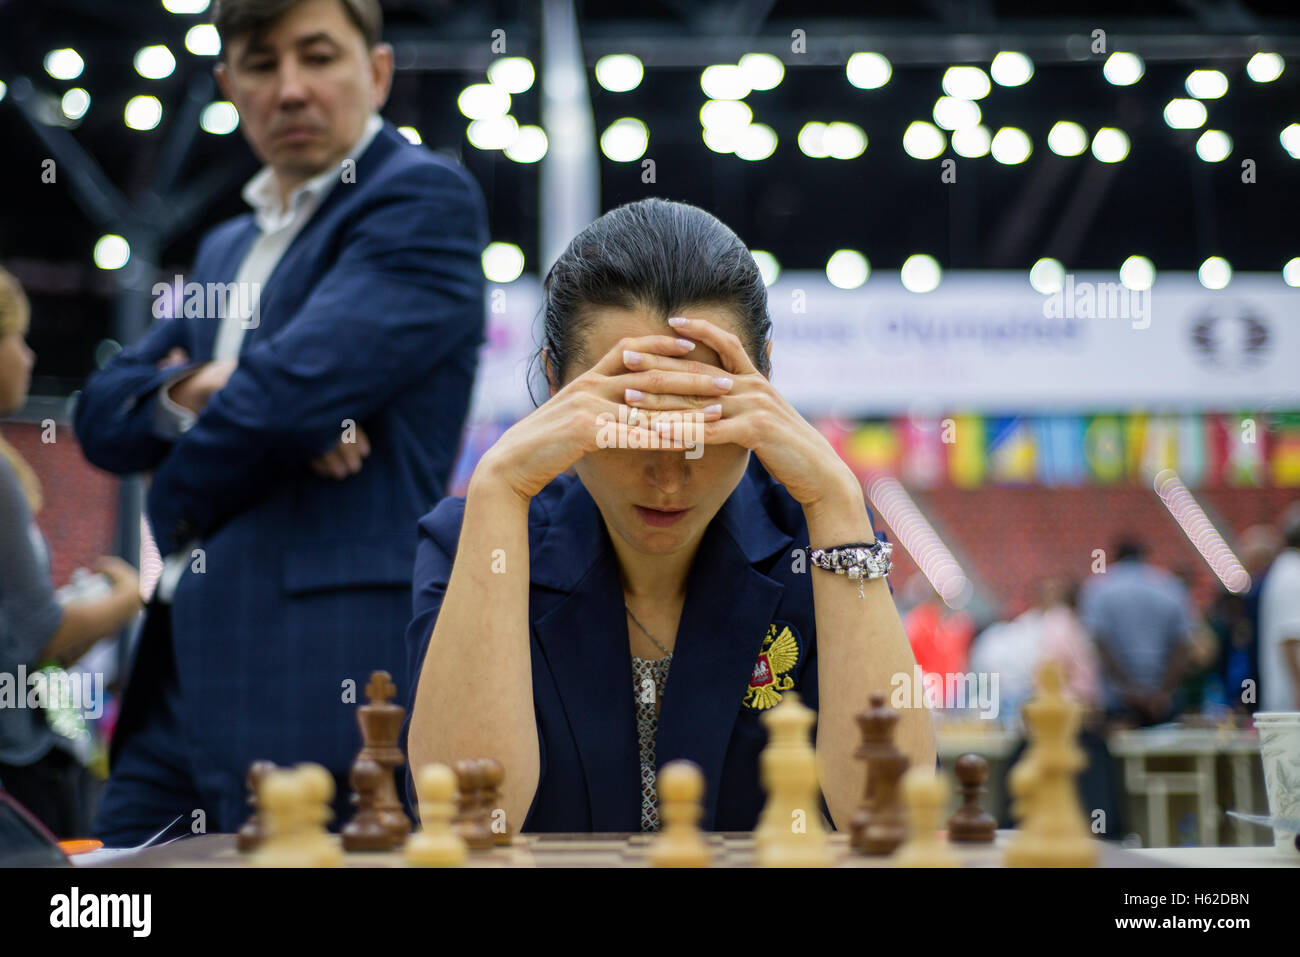 Portrait of Alexandra Kosteniuk, Russia, during the final round at the 42nd Chess Olympiad in Baku, Azerbaijan on Tuesday, September 13, 2016. Stock Photo